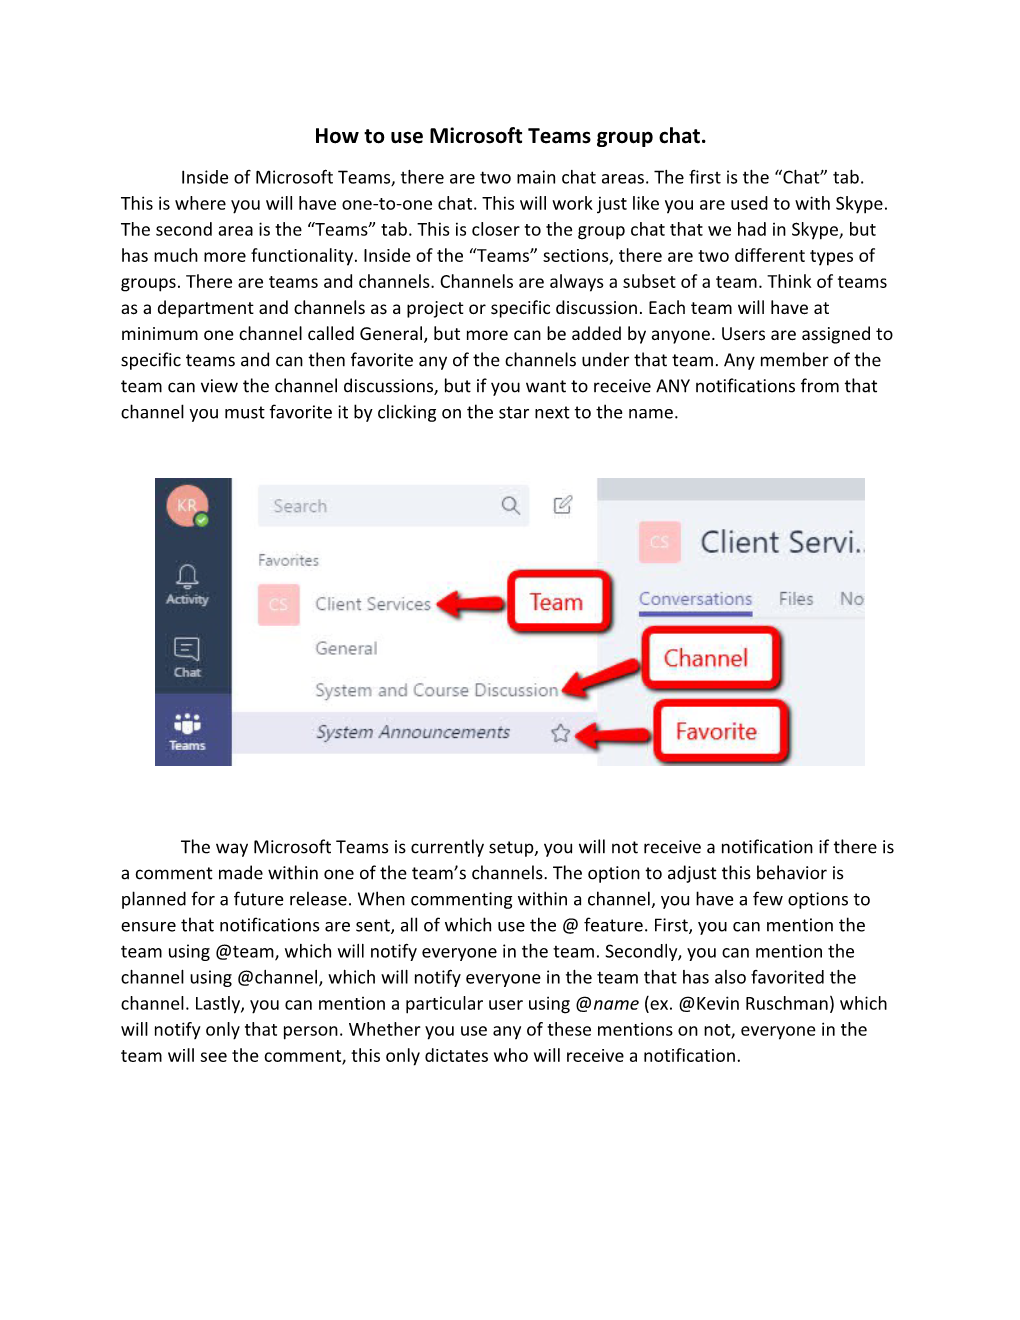 How to Use Microsoft Teams Group Chat